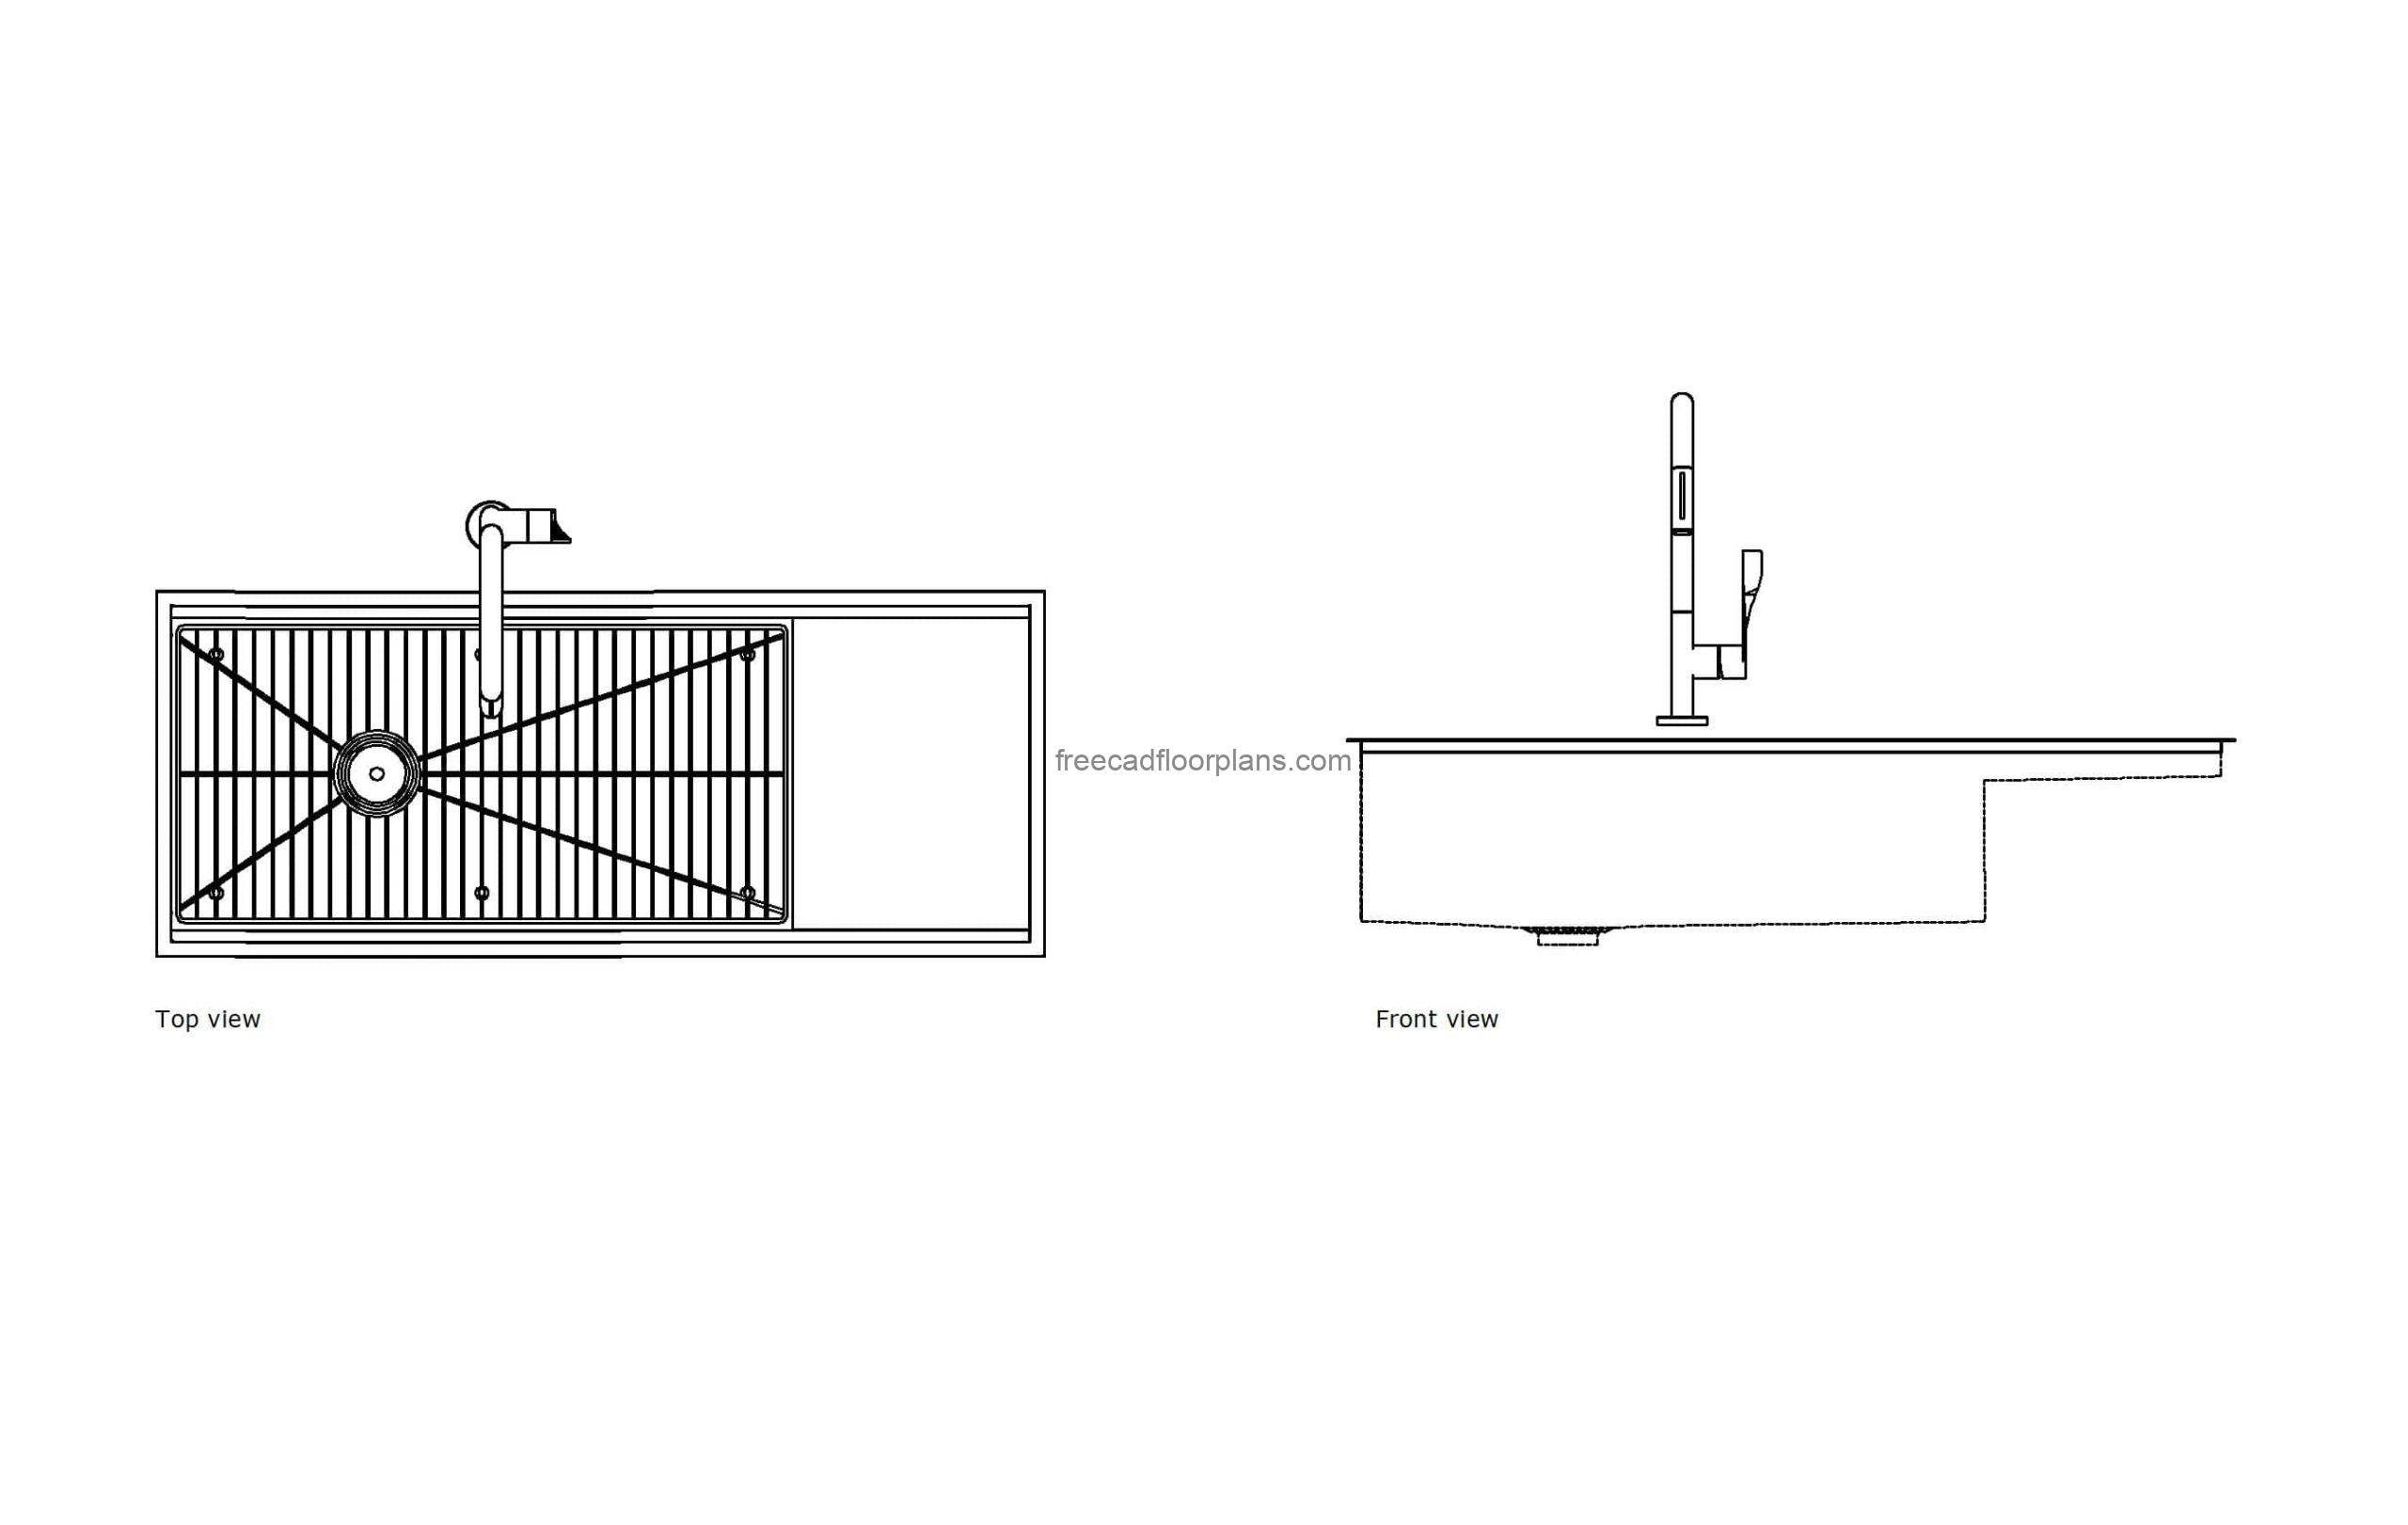 autocad drawing of a kohler dishwasher, 2d plan and elevation views, dwg file free for download